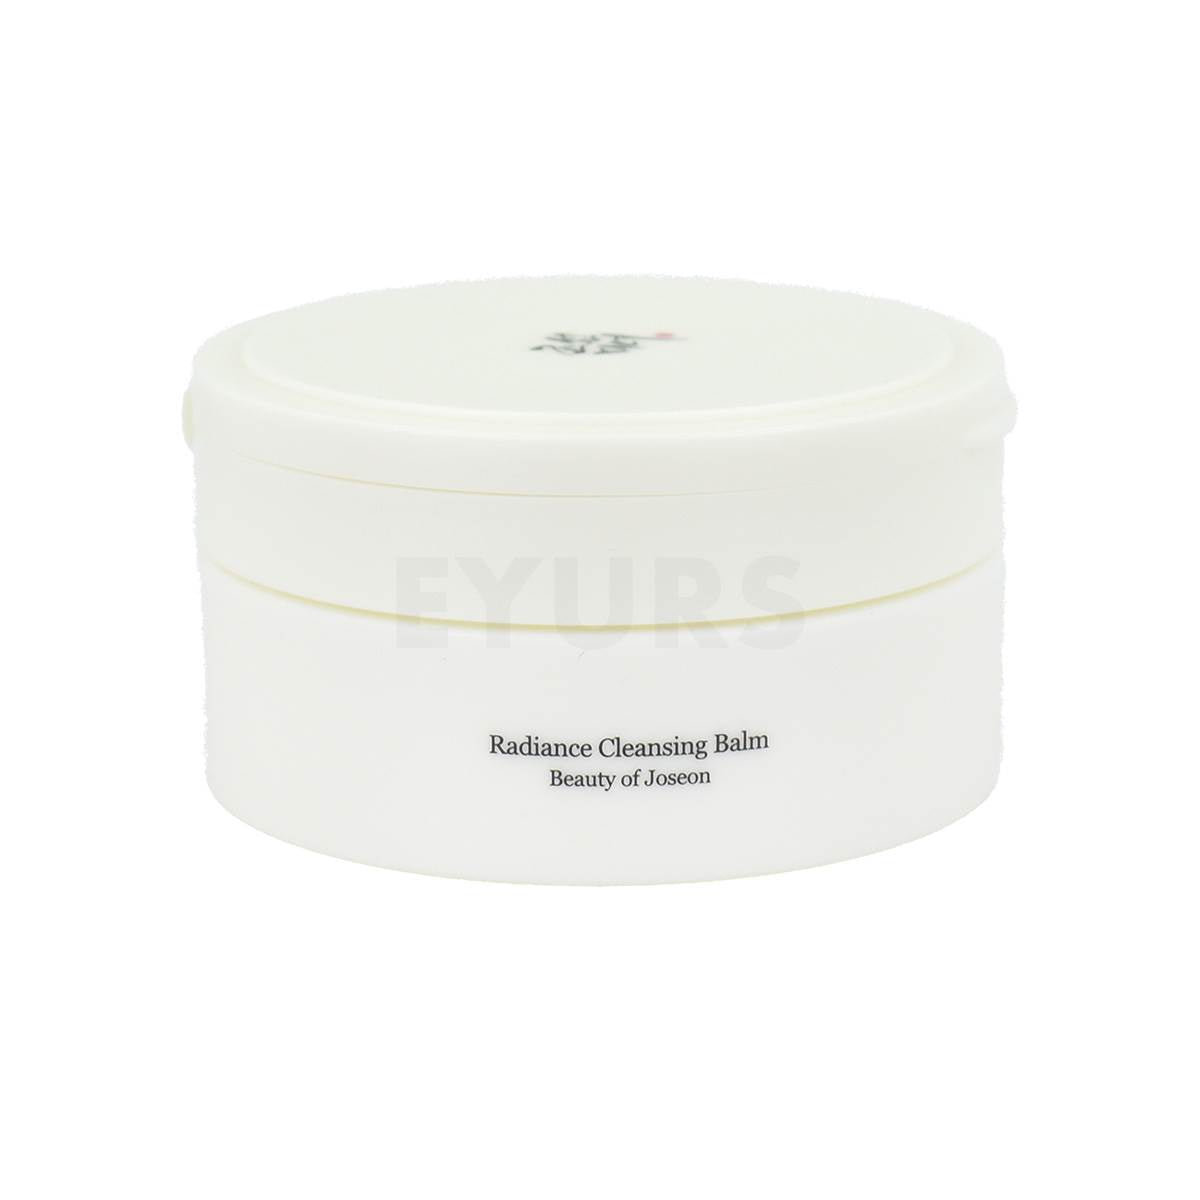 beauty of joseon radiance cleansing balm front side product